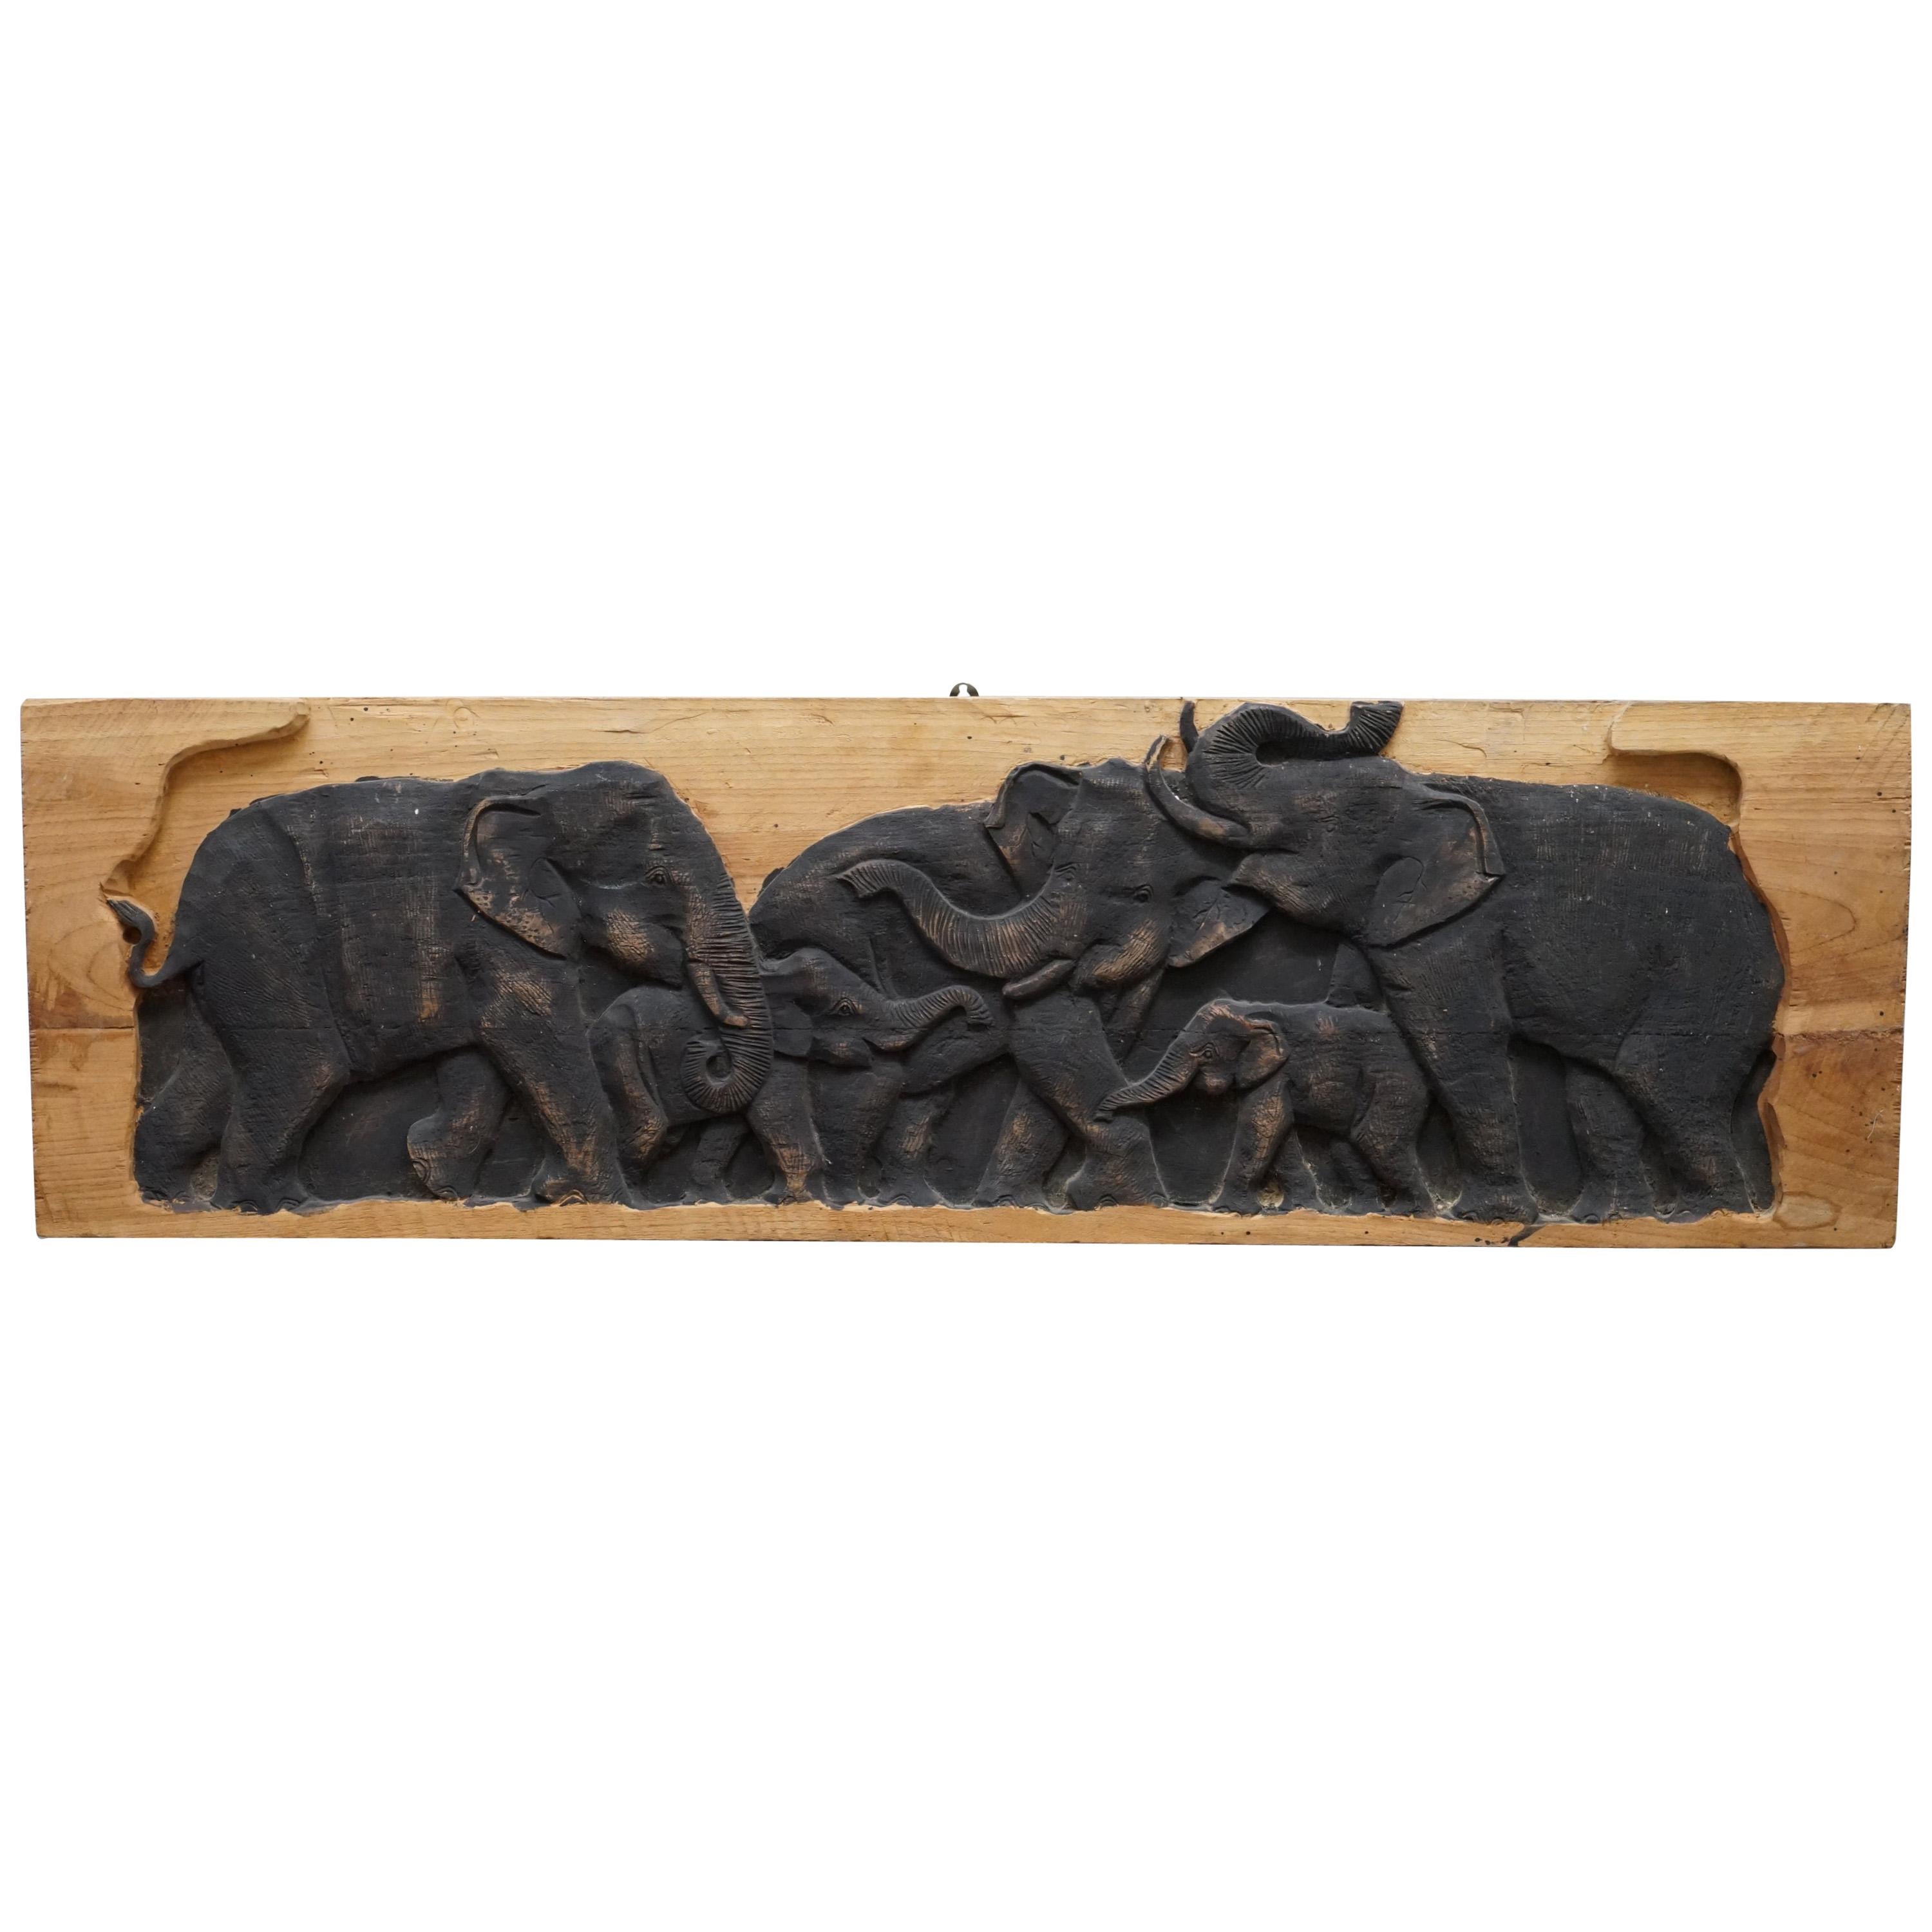 Lovely Vintage Carved Wood Display Depicting a Herd of Elephants, circa 1960s For Sale